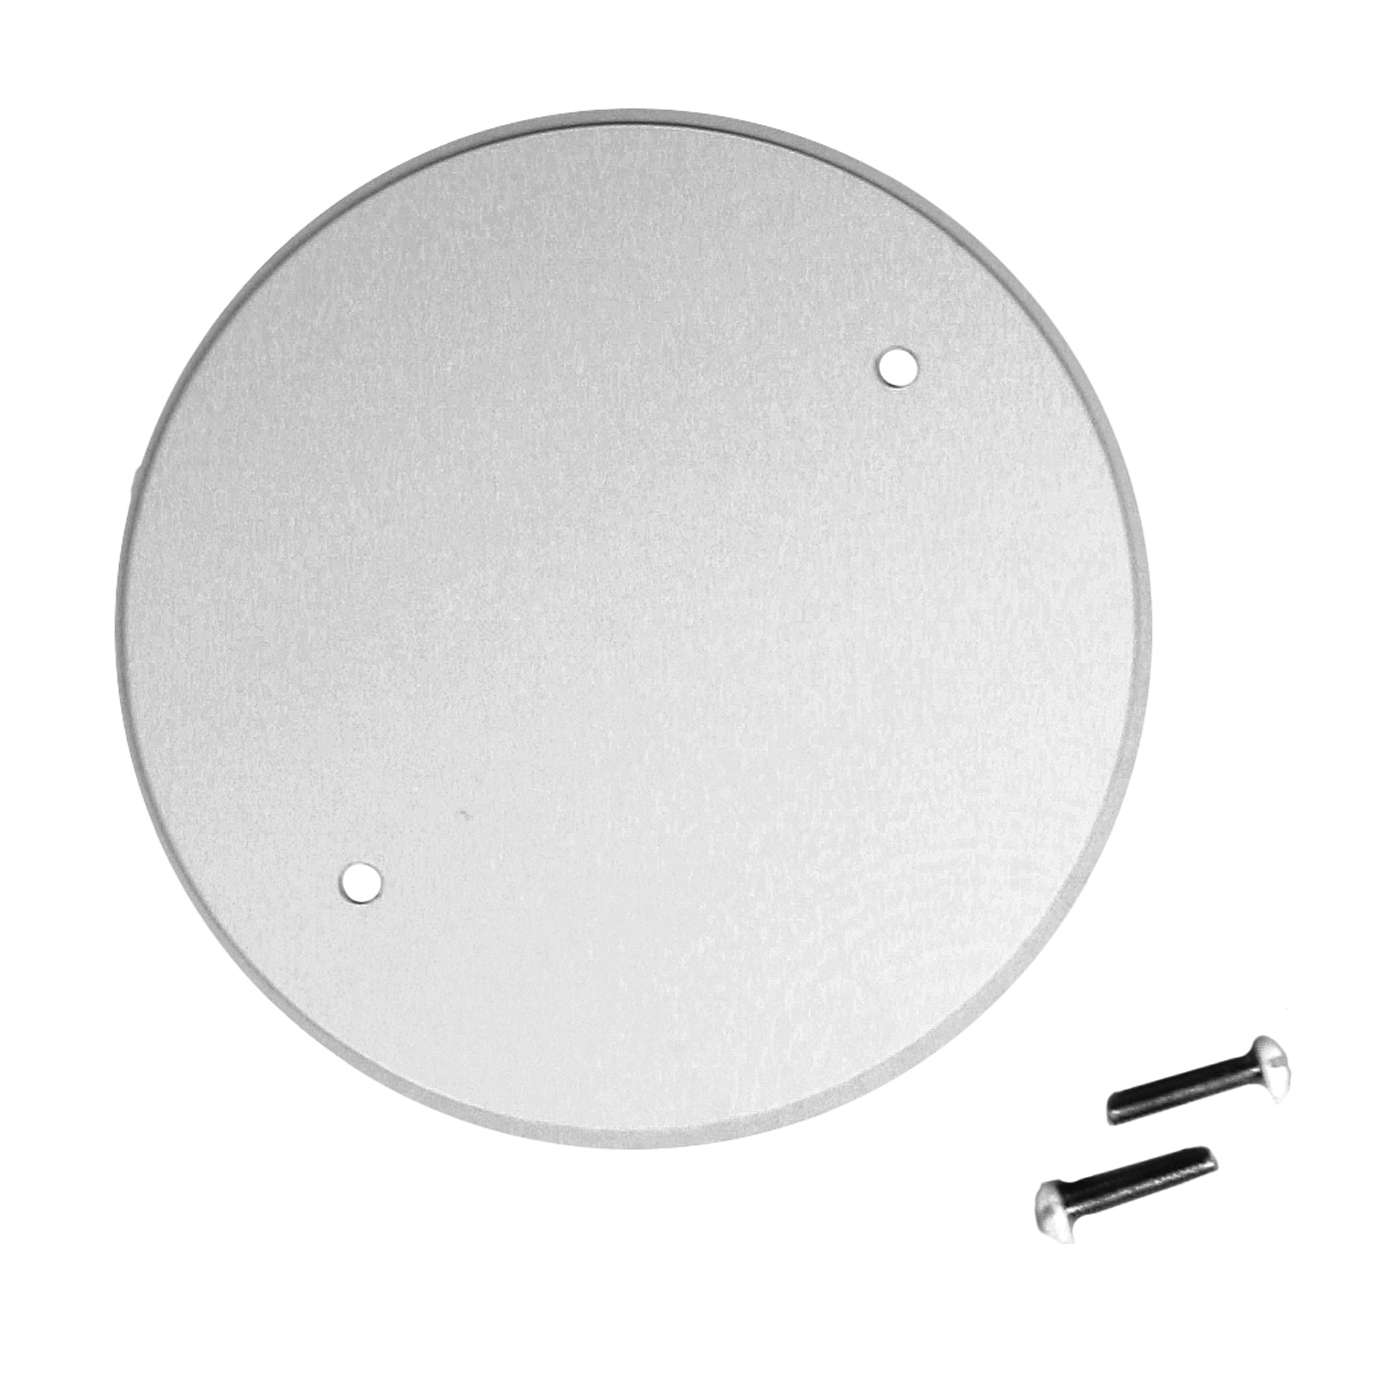 60220 Blank-Up Kit, Ceiling, White, For: Outlet Box After Removal of an Existing Fixture